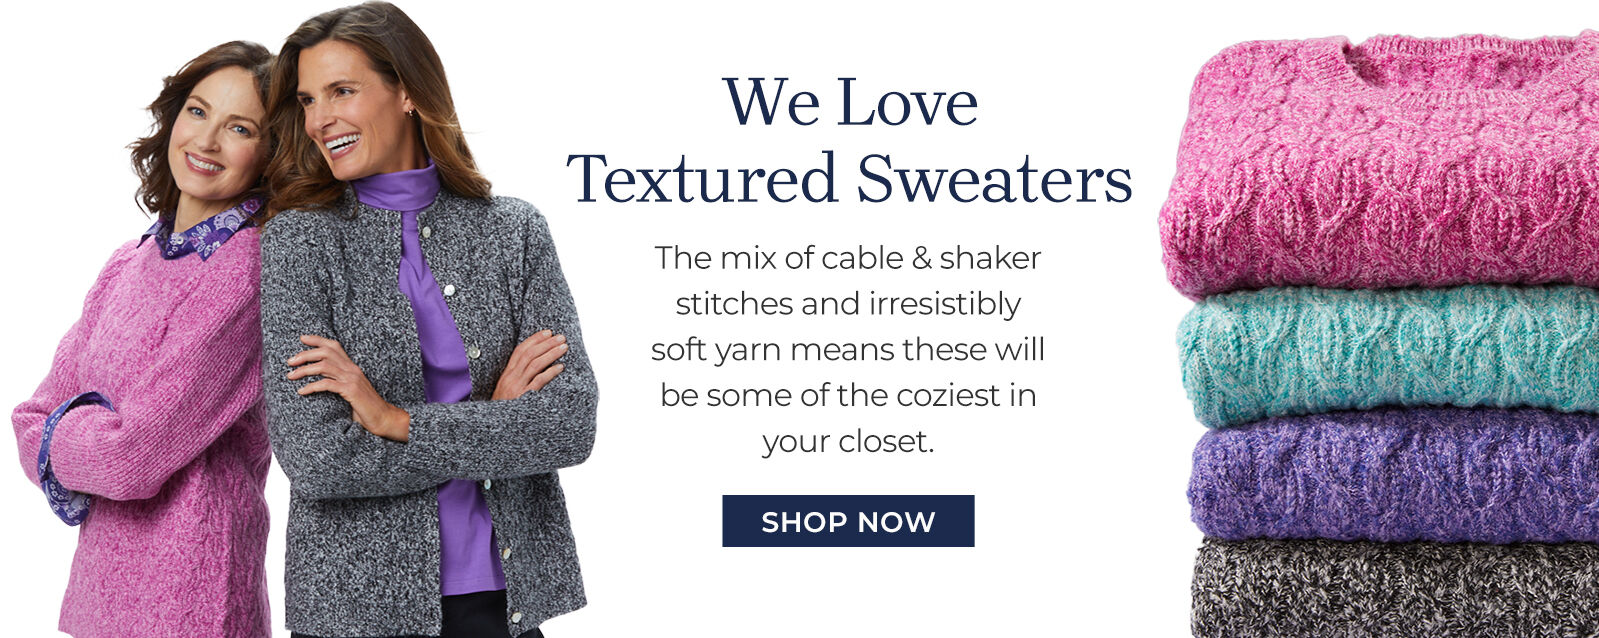 we love TEXTURED SWEATERS the mix of cable & shaker stitches and irresistibly soft yarn means these will be some of the coziest in your closet. shop now